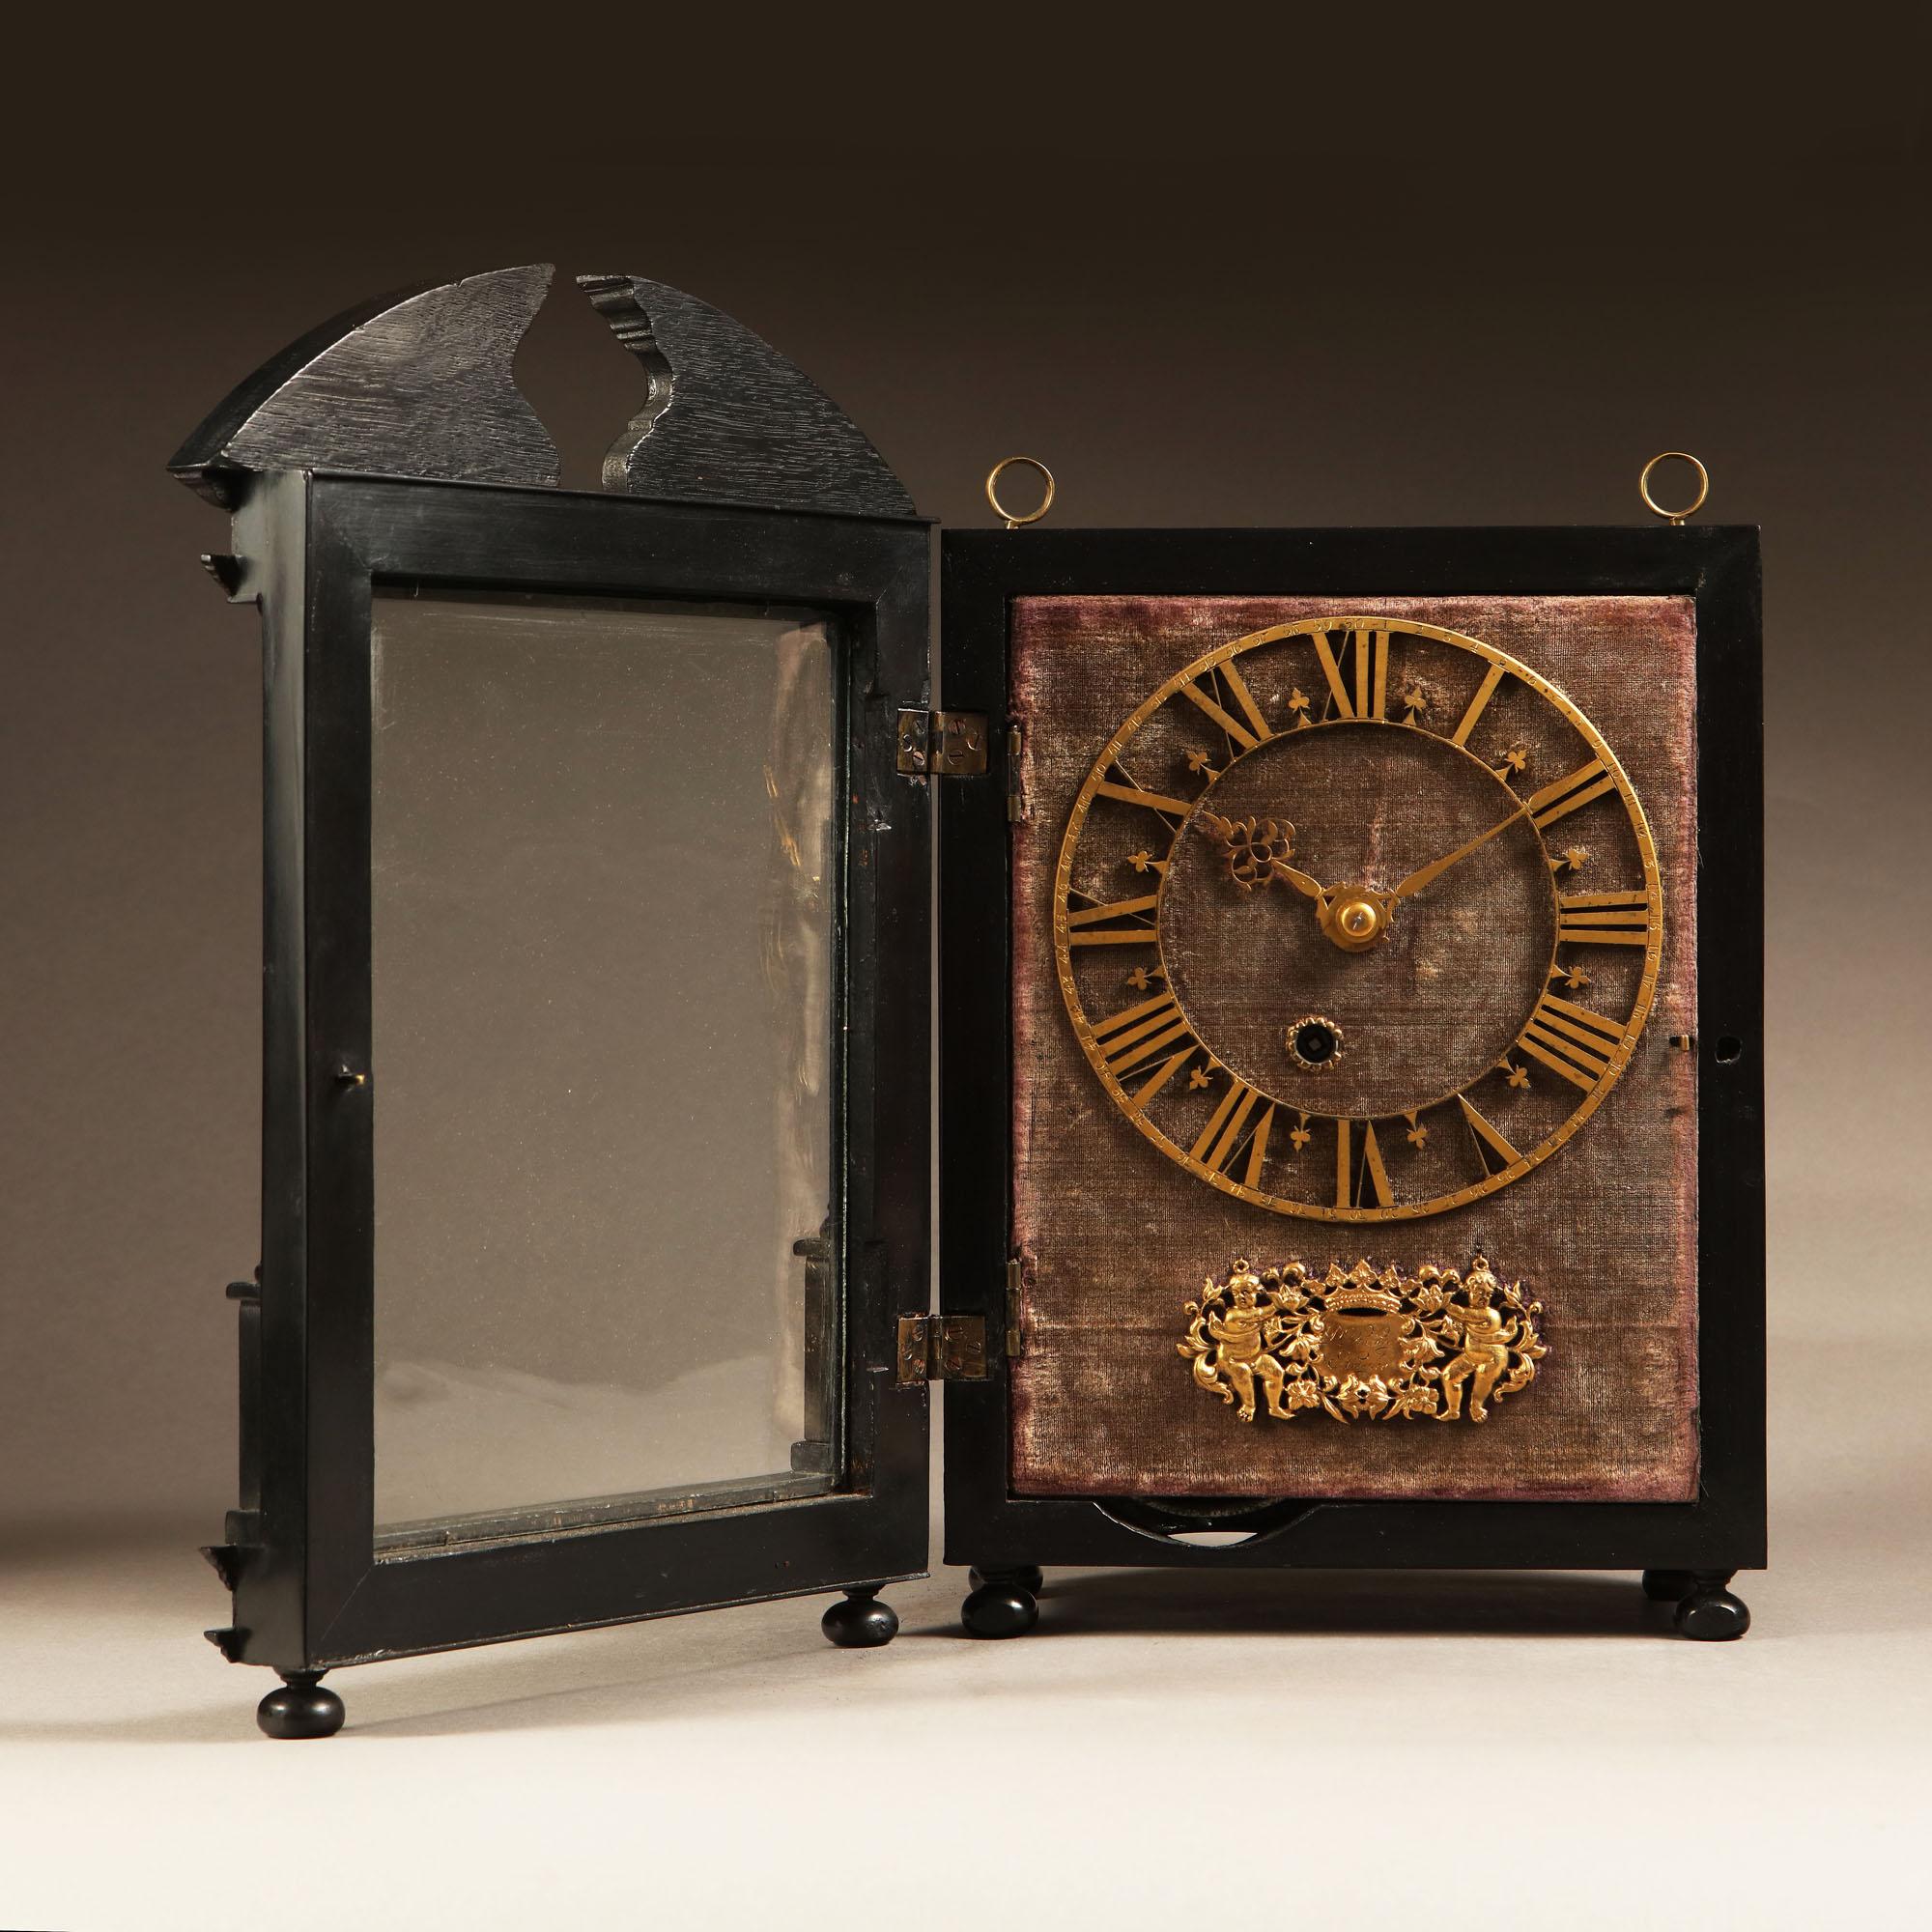 Unusually small Hague clock made c. 1675 by Pieter Visbagh, who was apprenticed by Salomon Coster. The latter made the first pendulum clock according to the instructions of Christiaan Huygens, the internationally renowned scientist who developed the